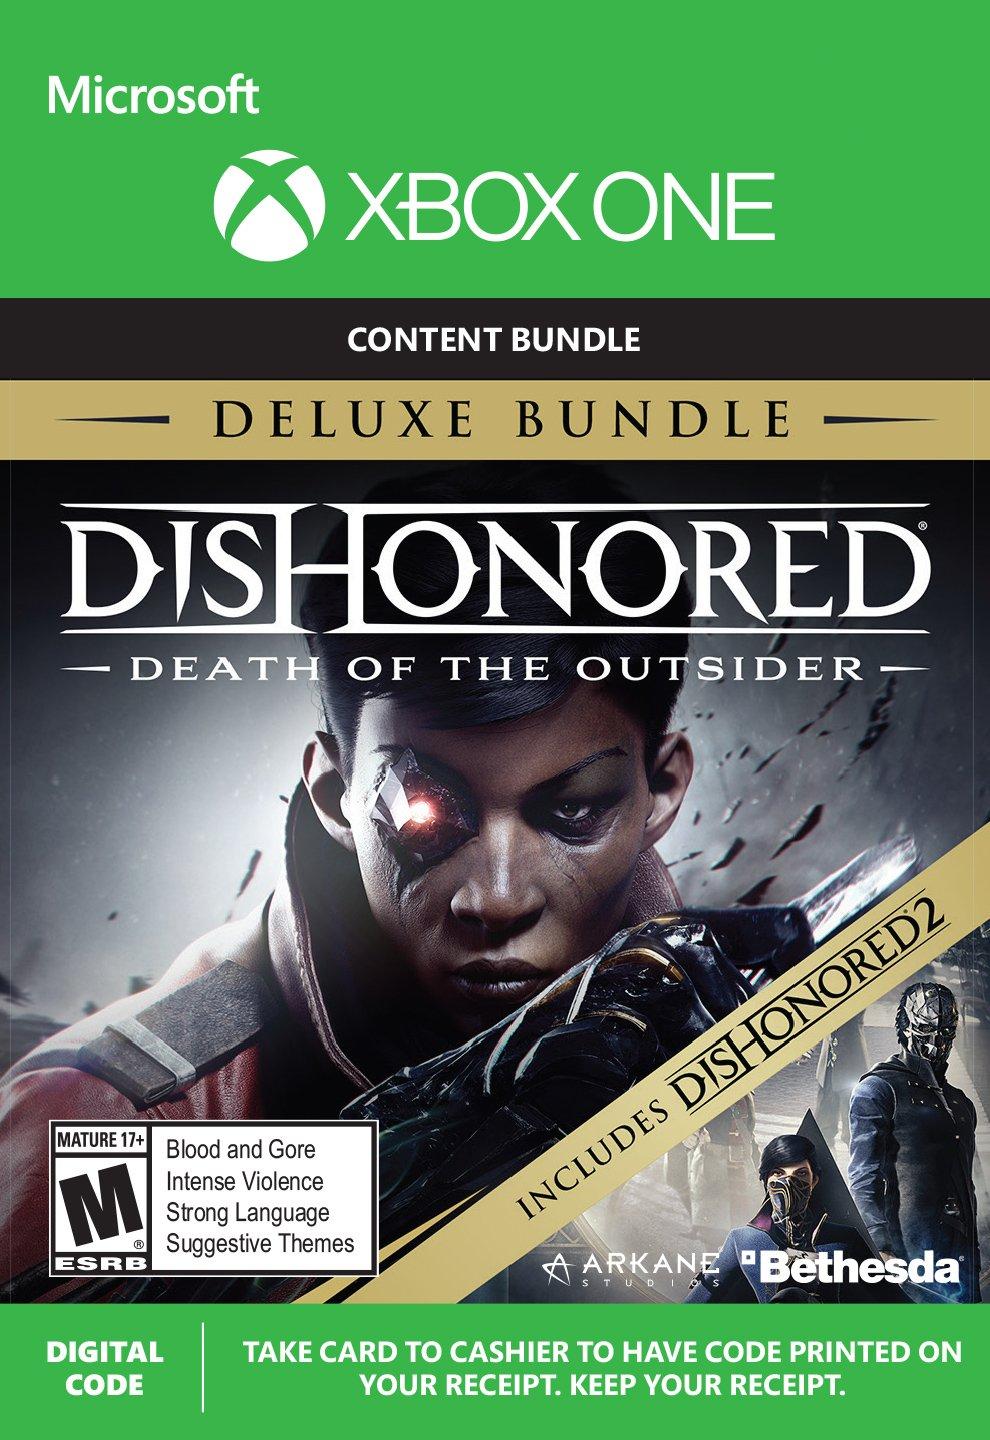 Dishonored: Death of the Outsider safe combinations - your choice